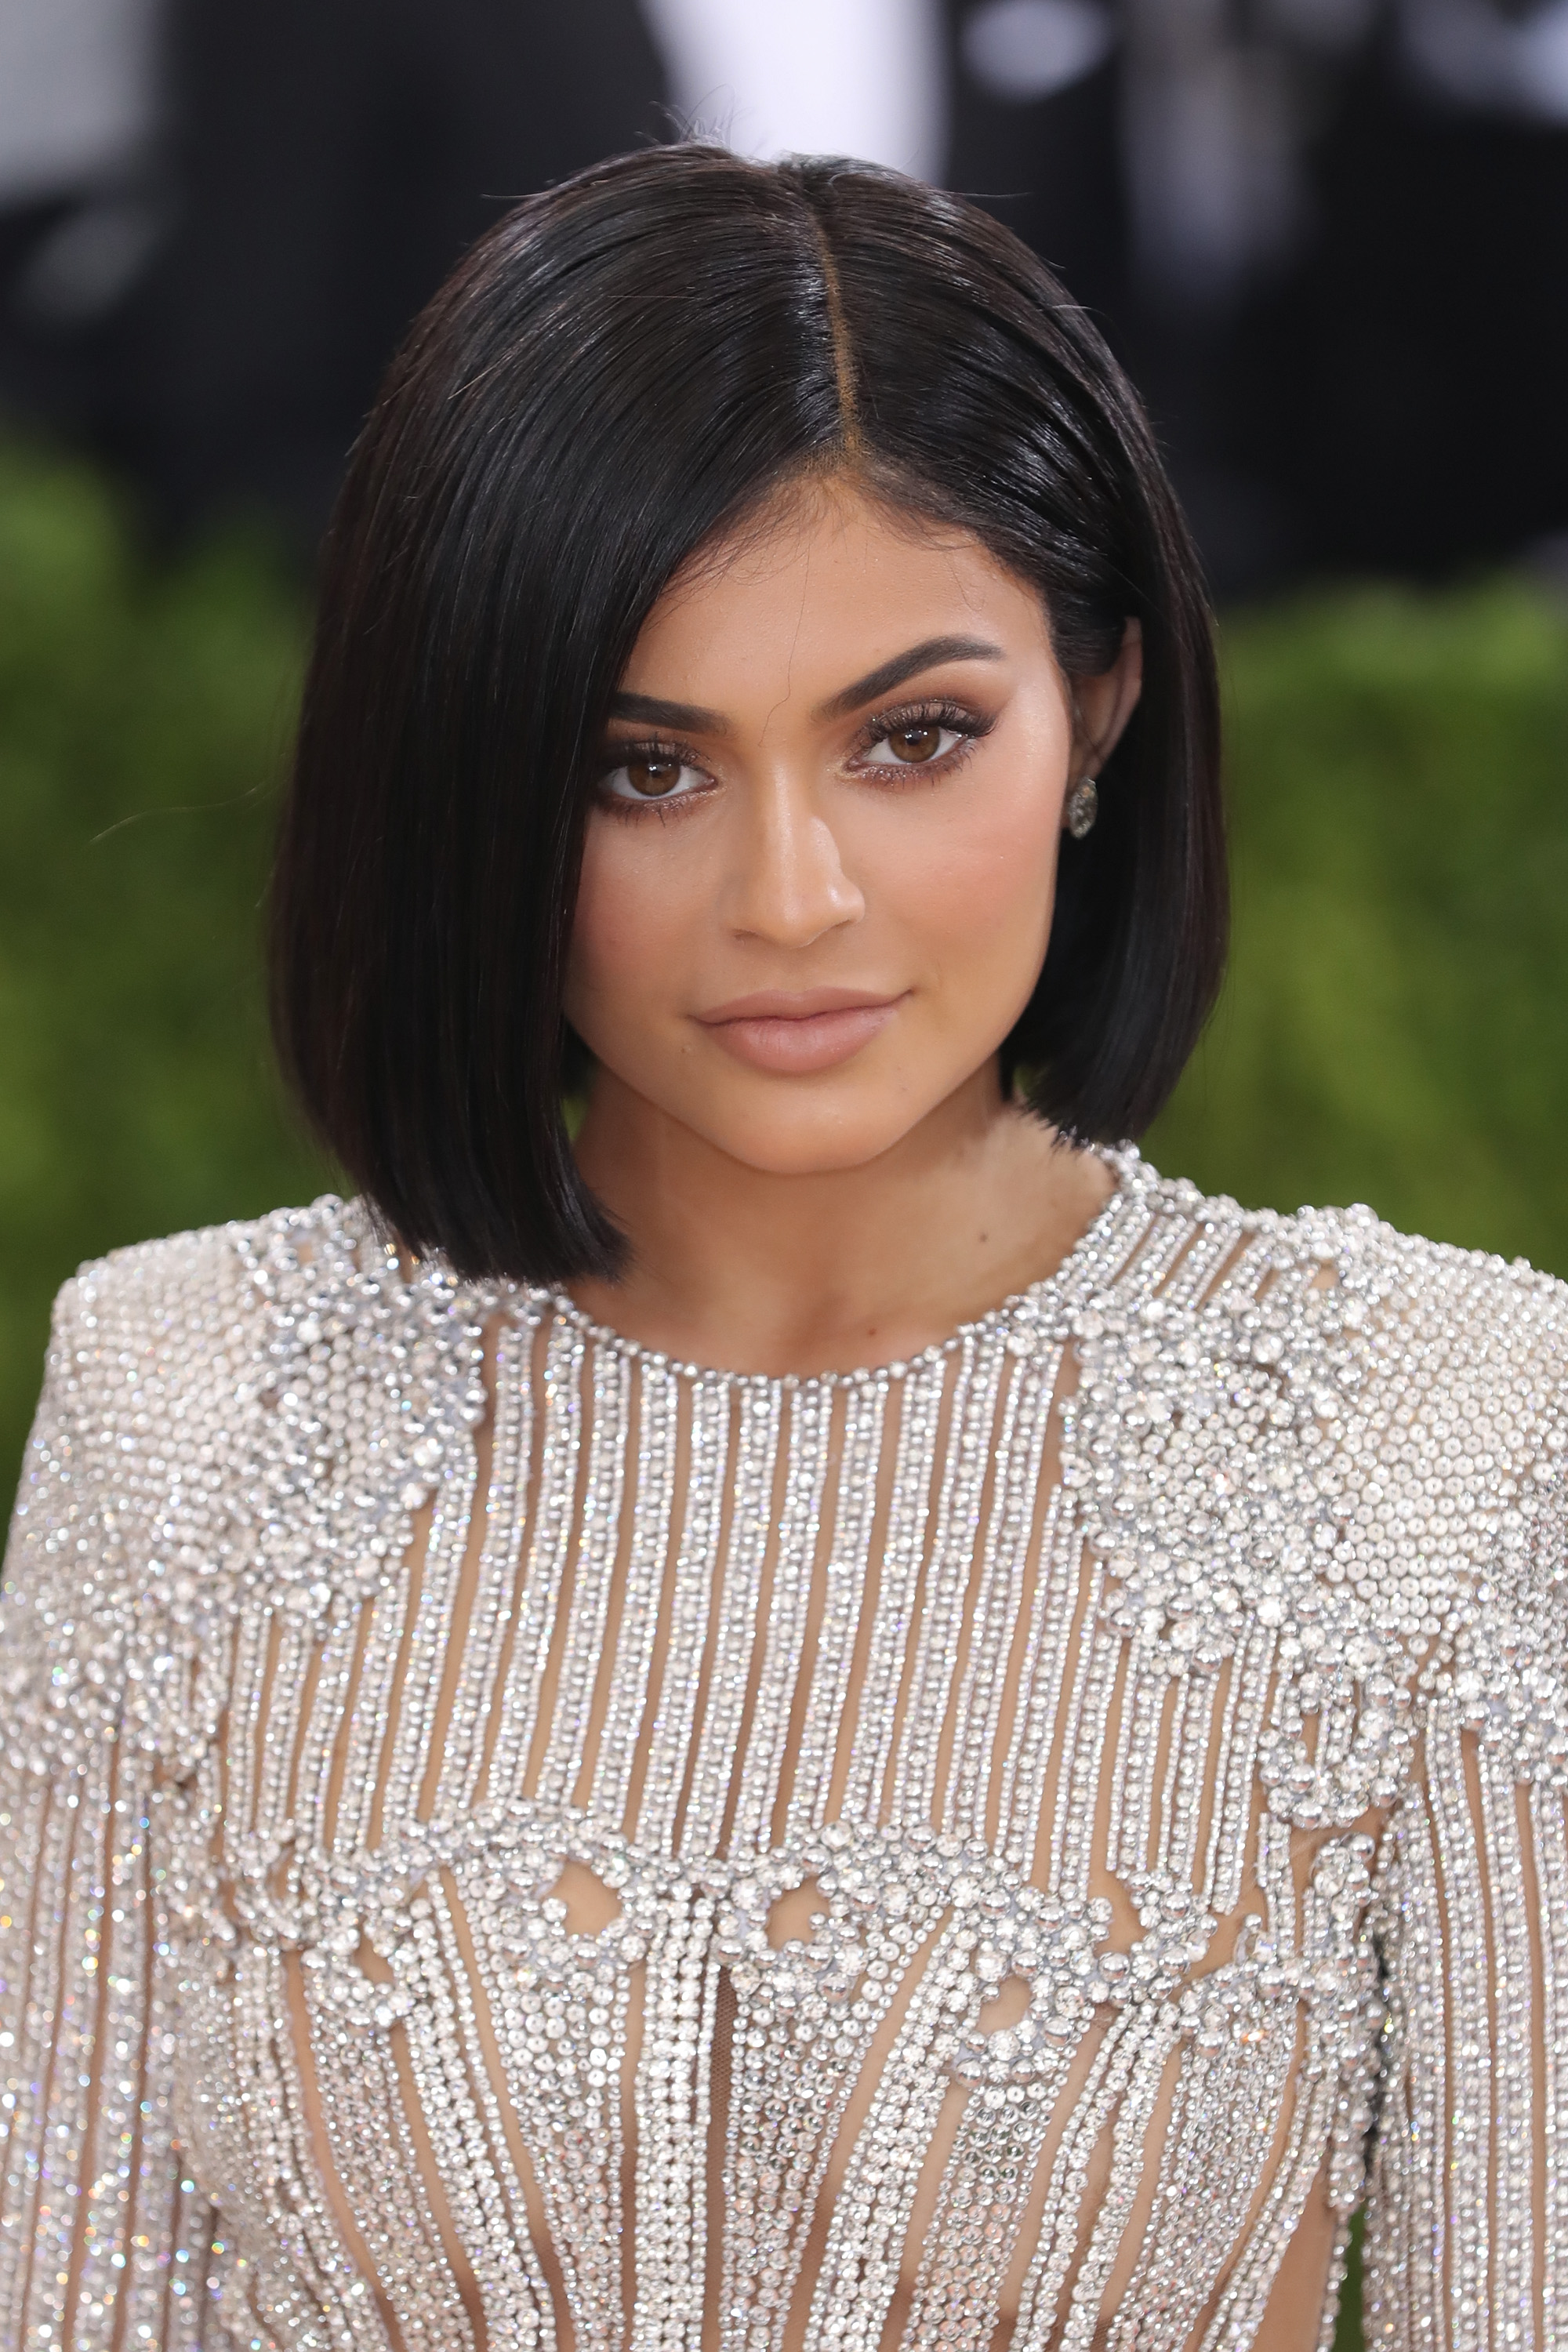 What Brushes Does Kylie Jenner Use? She's Spilling All On Her App — PHOTOS